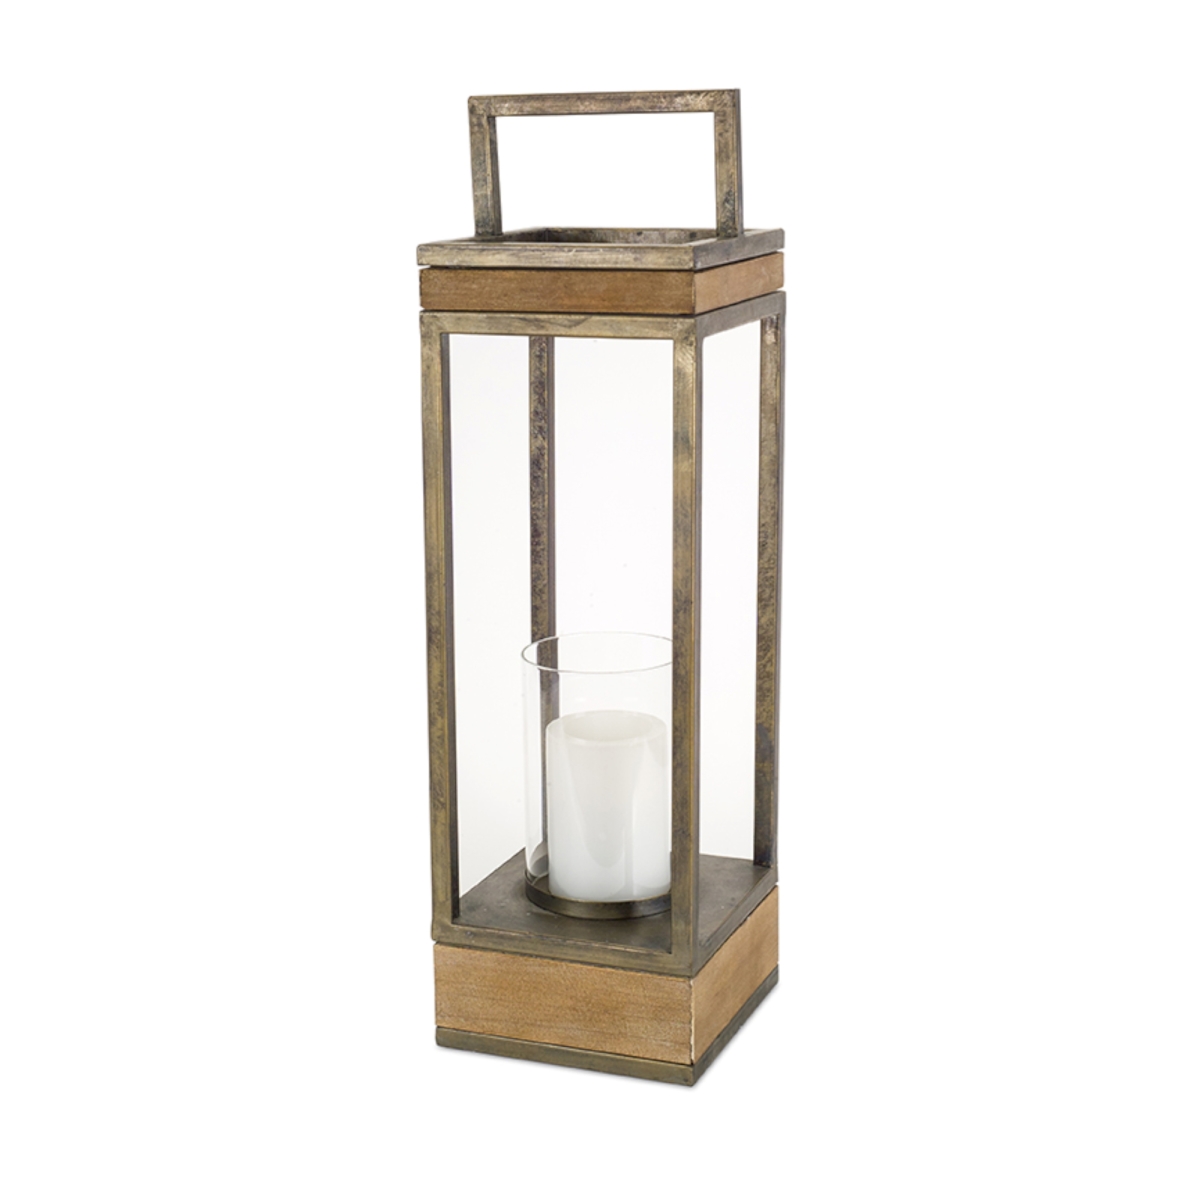 UPC 746427725095 product image for 72509DS 23 x 6.5 in. Wood & Metal Lantern, Brown & Copper | upcitemdb.com